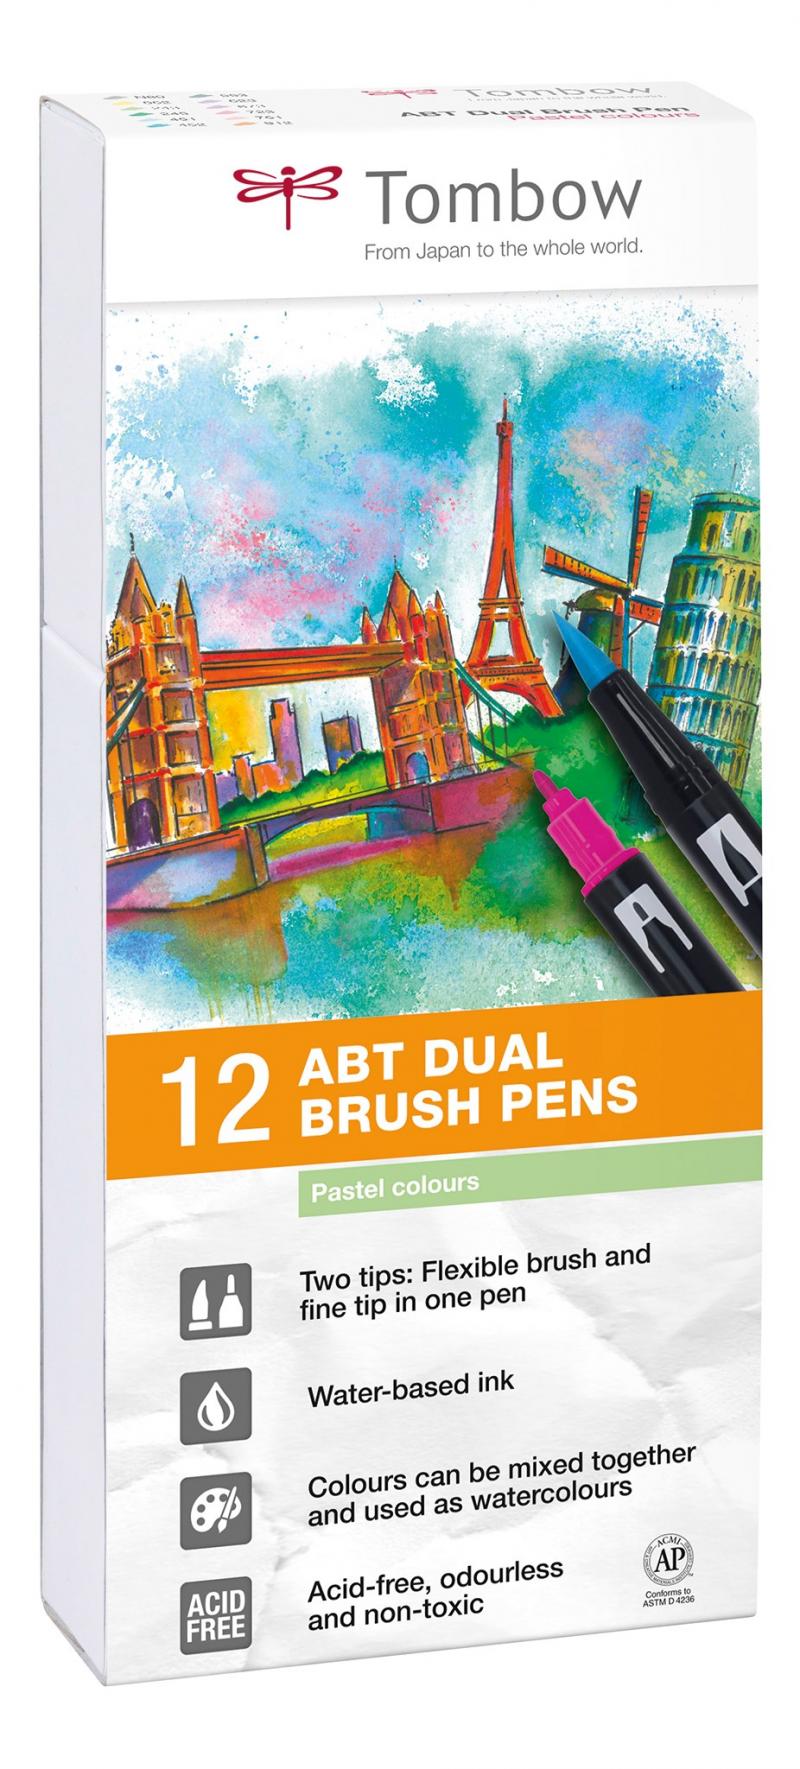 Markers Dual Brush 12P-2 Pastel st, Tombow ABT-12P-2